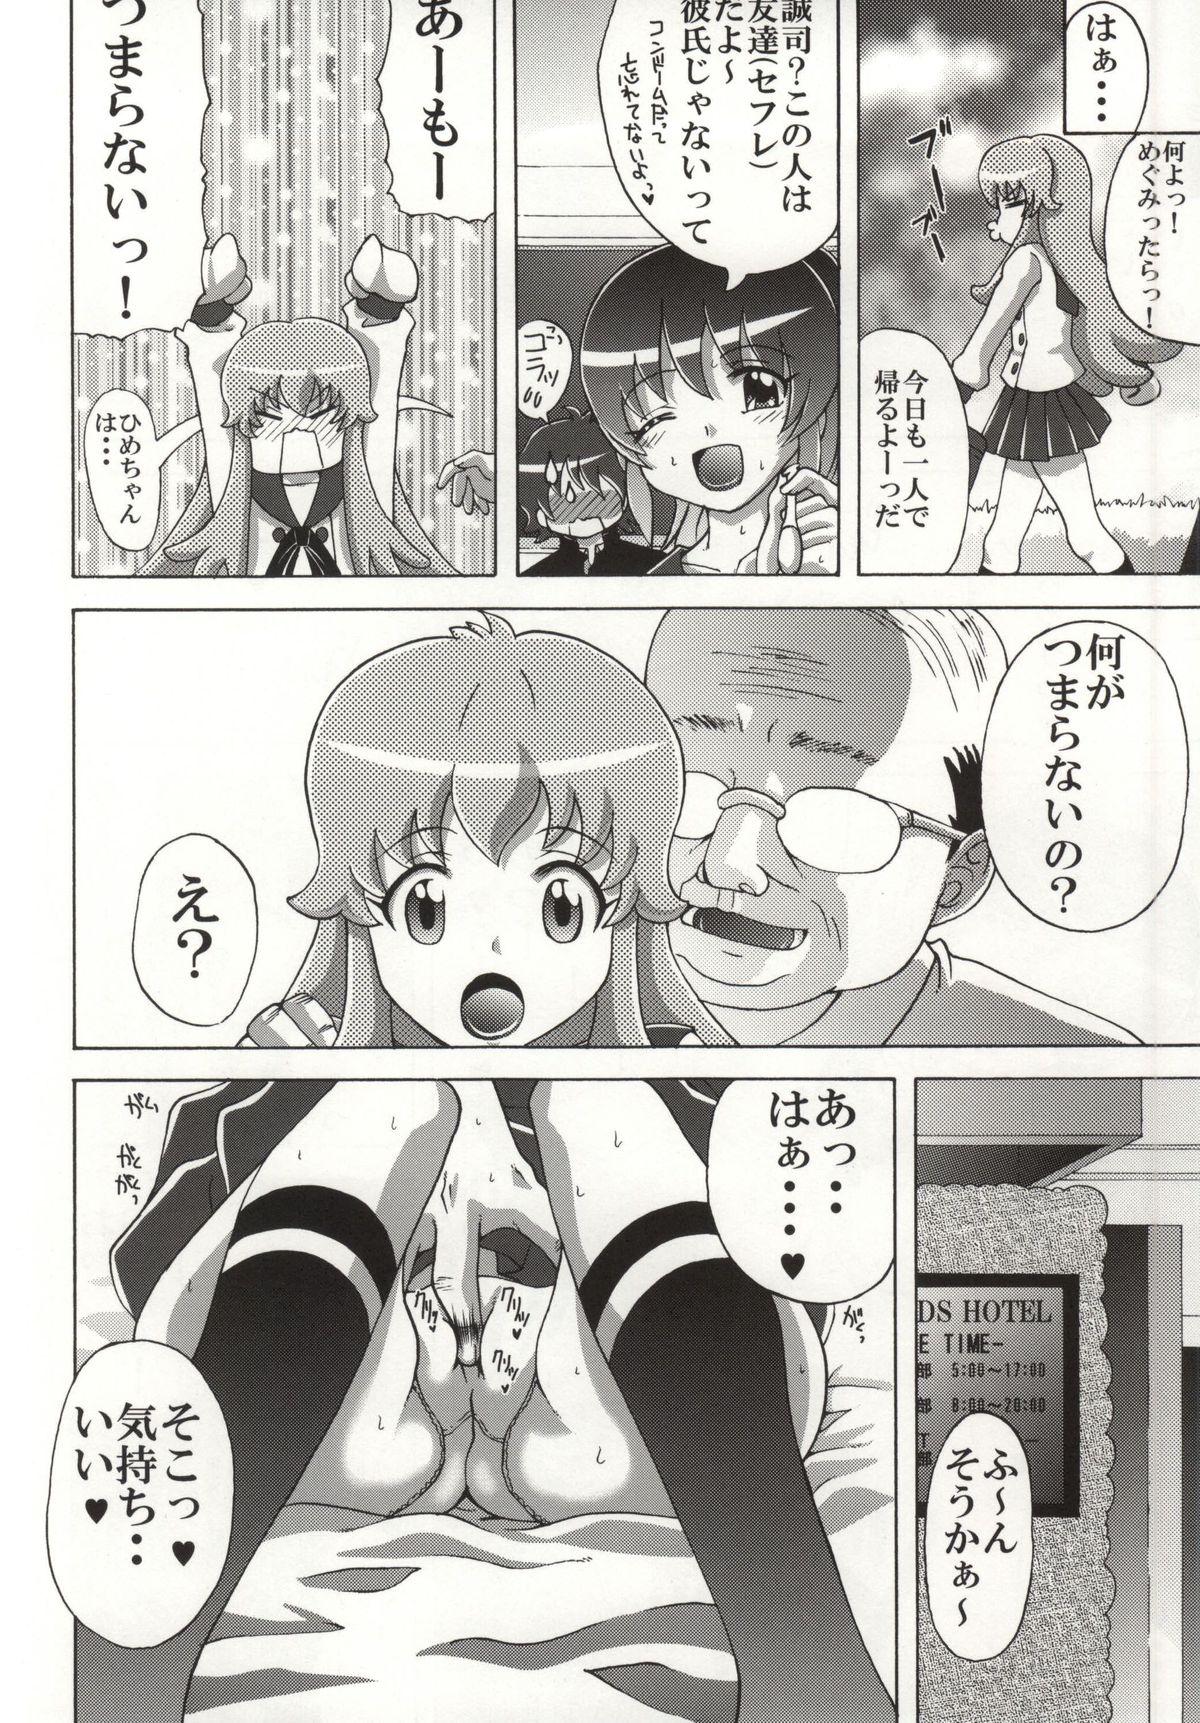 Off Hime-chan no Tomodachi - Happinesscharge precure Hardfuck - Page 3